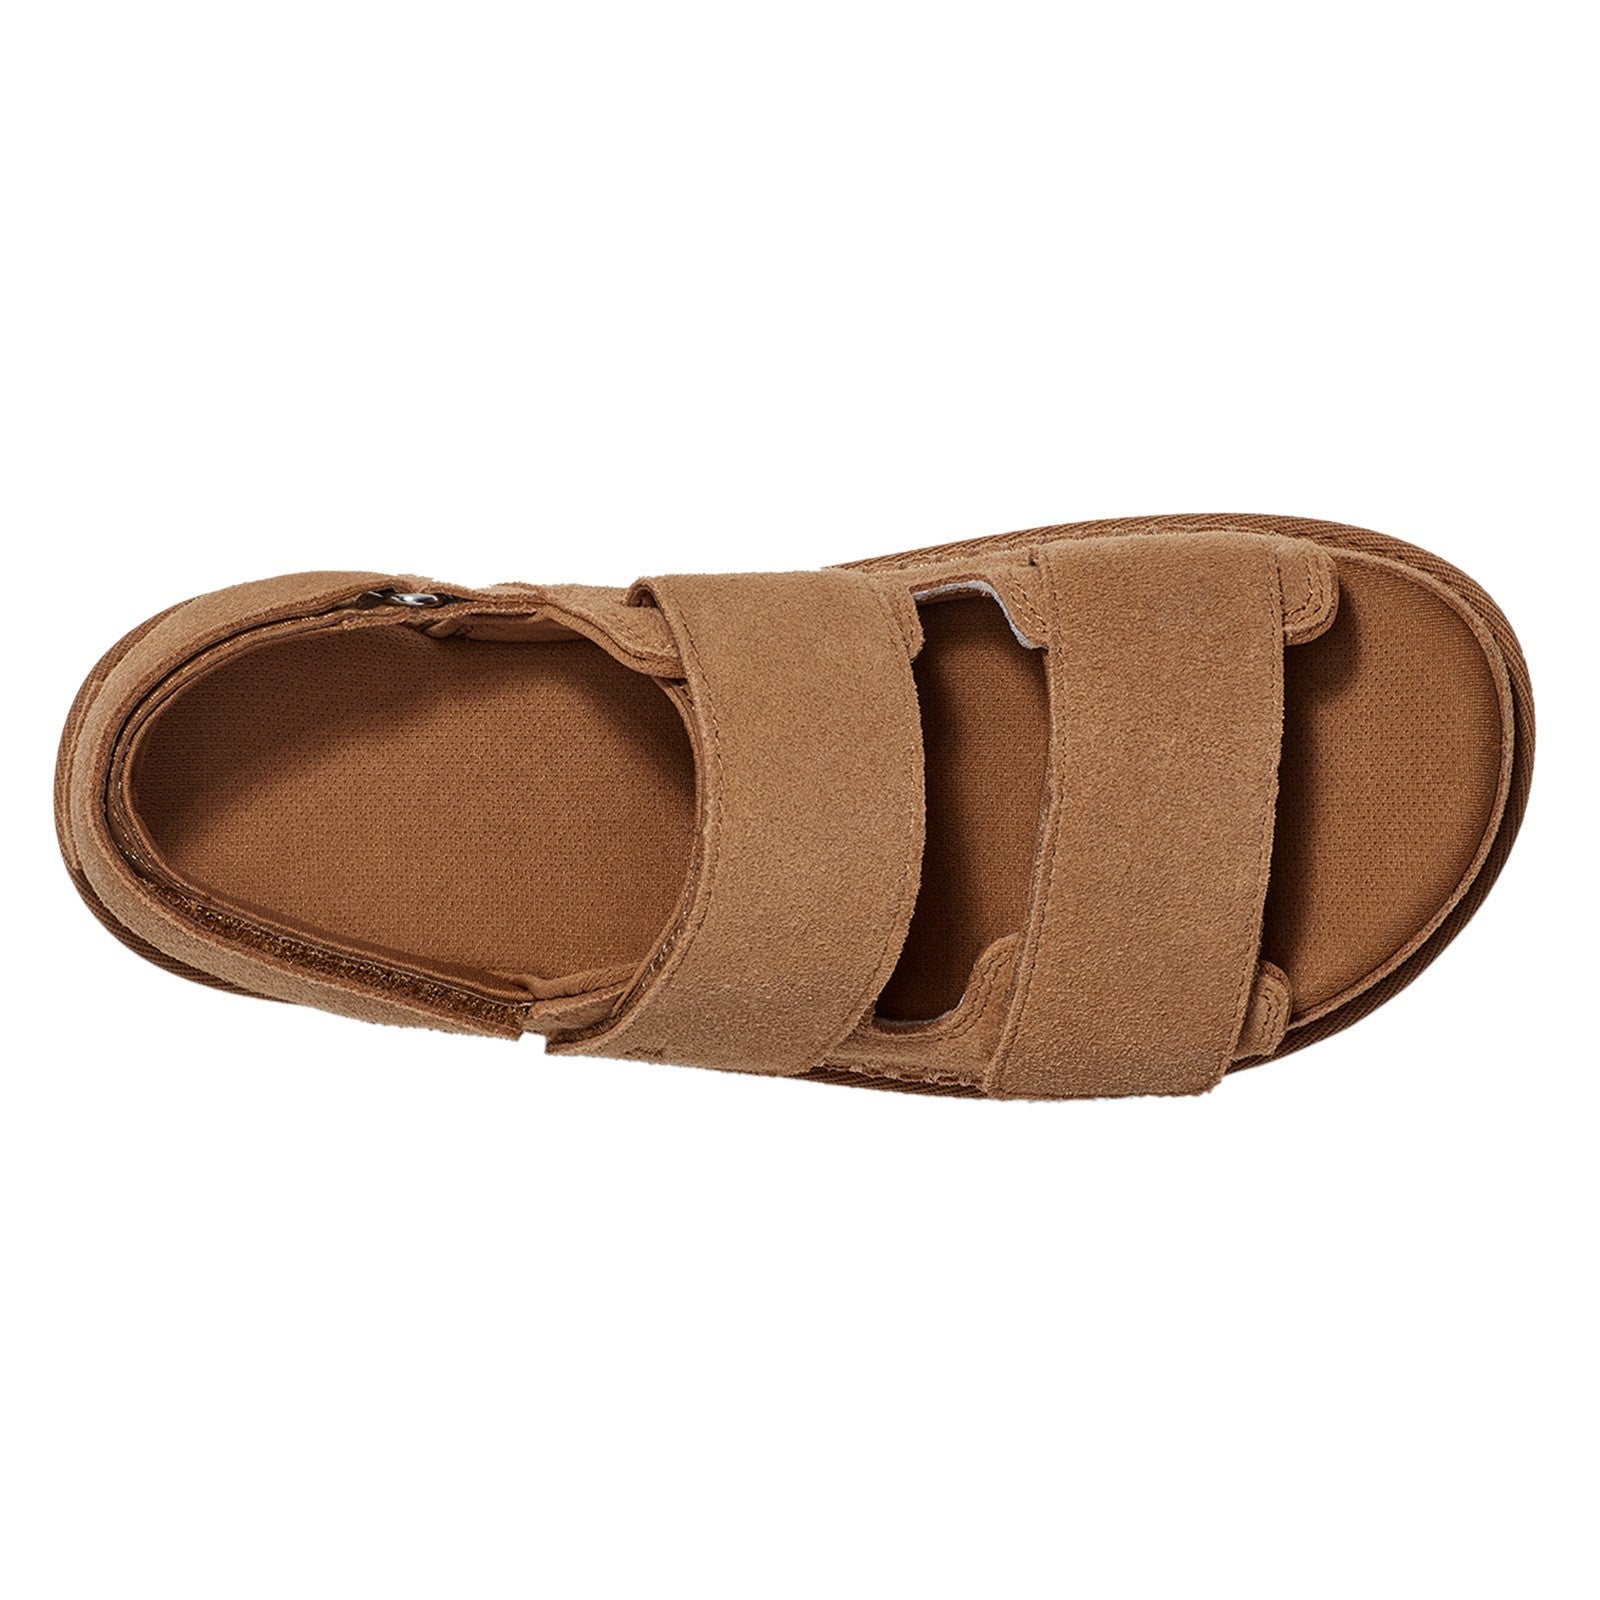 Top view of the Women's Goldenstar Sling by UGG in the color Chestnut